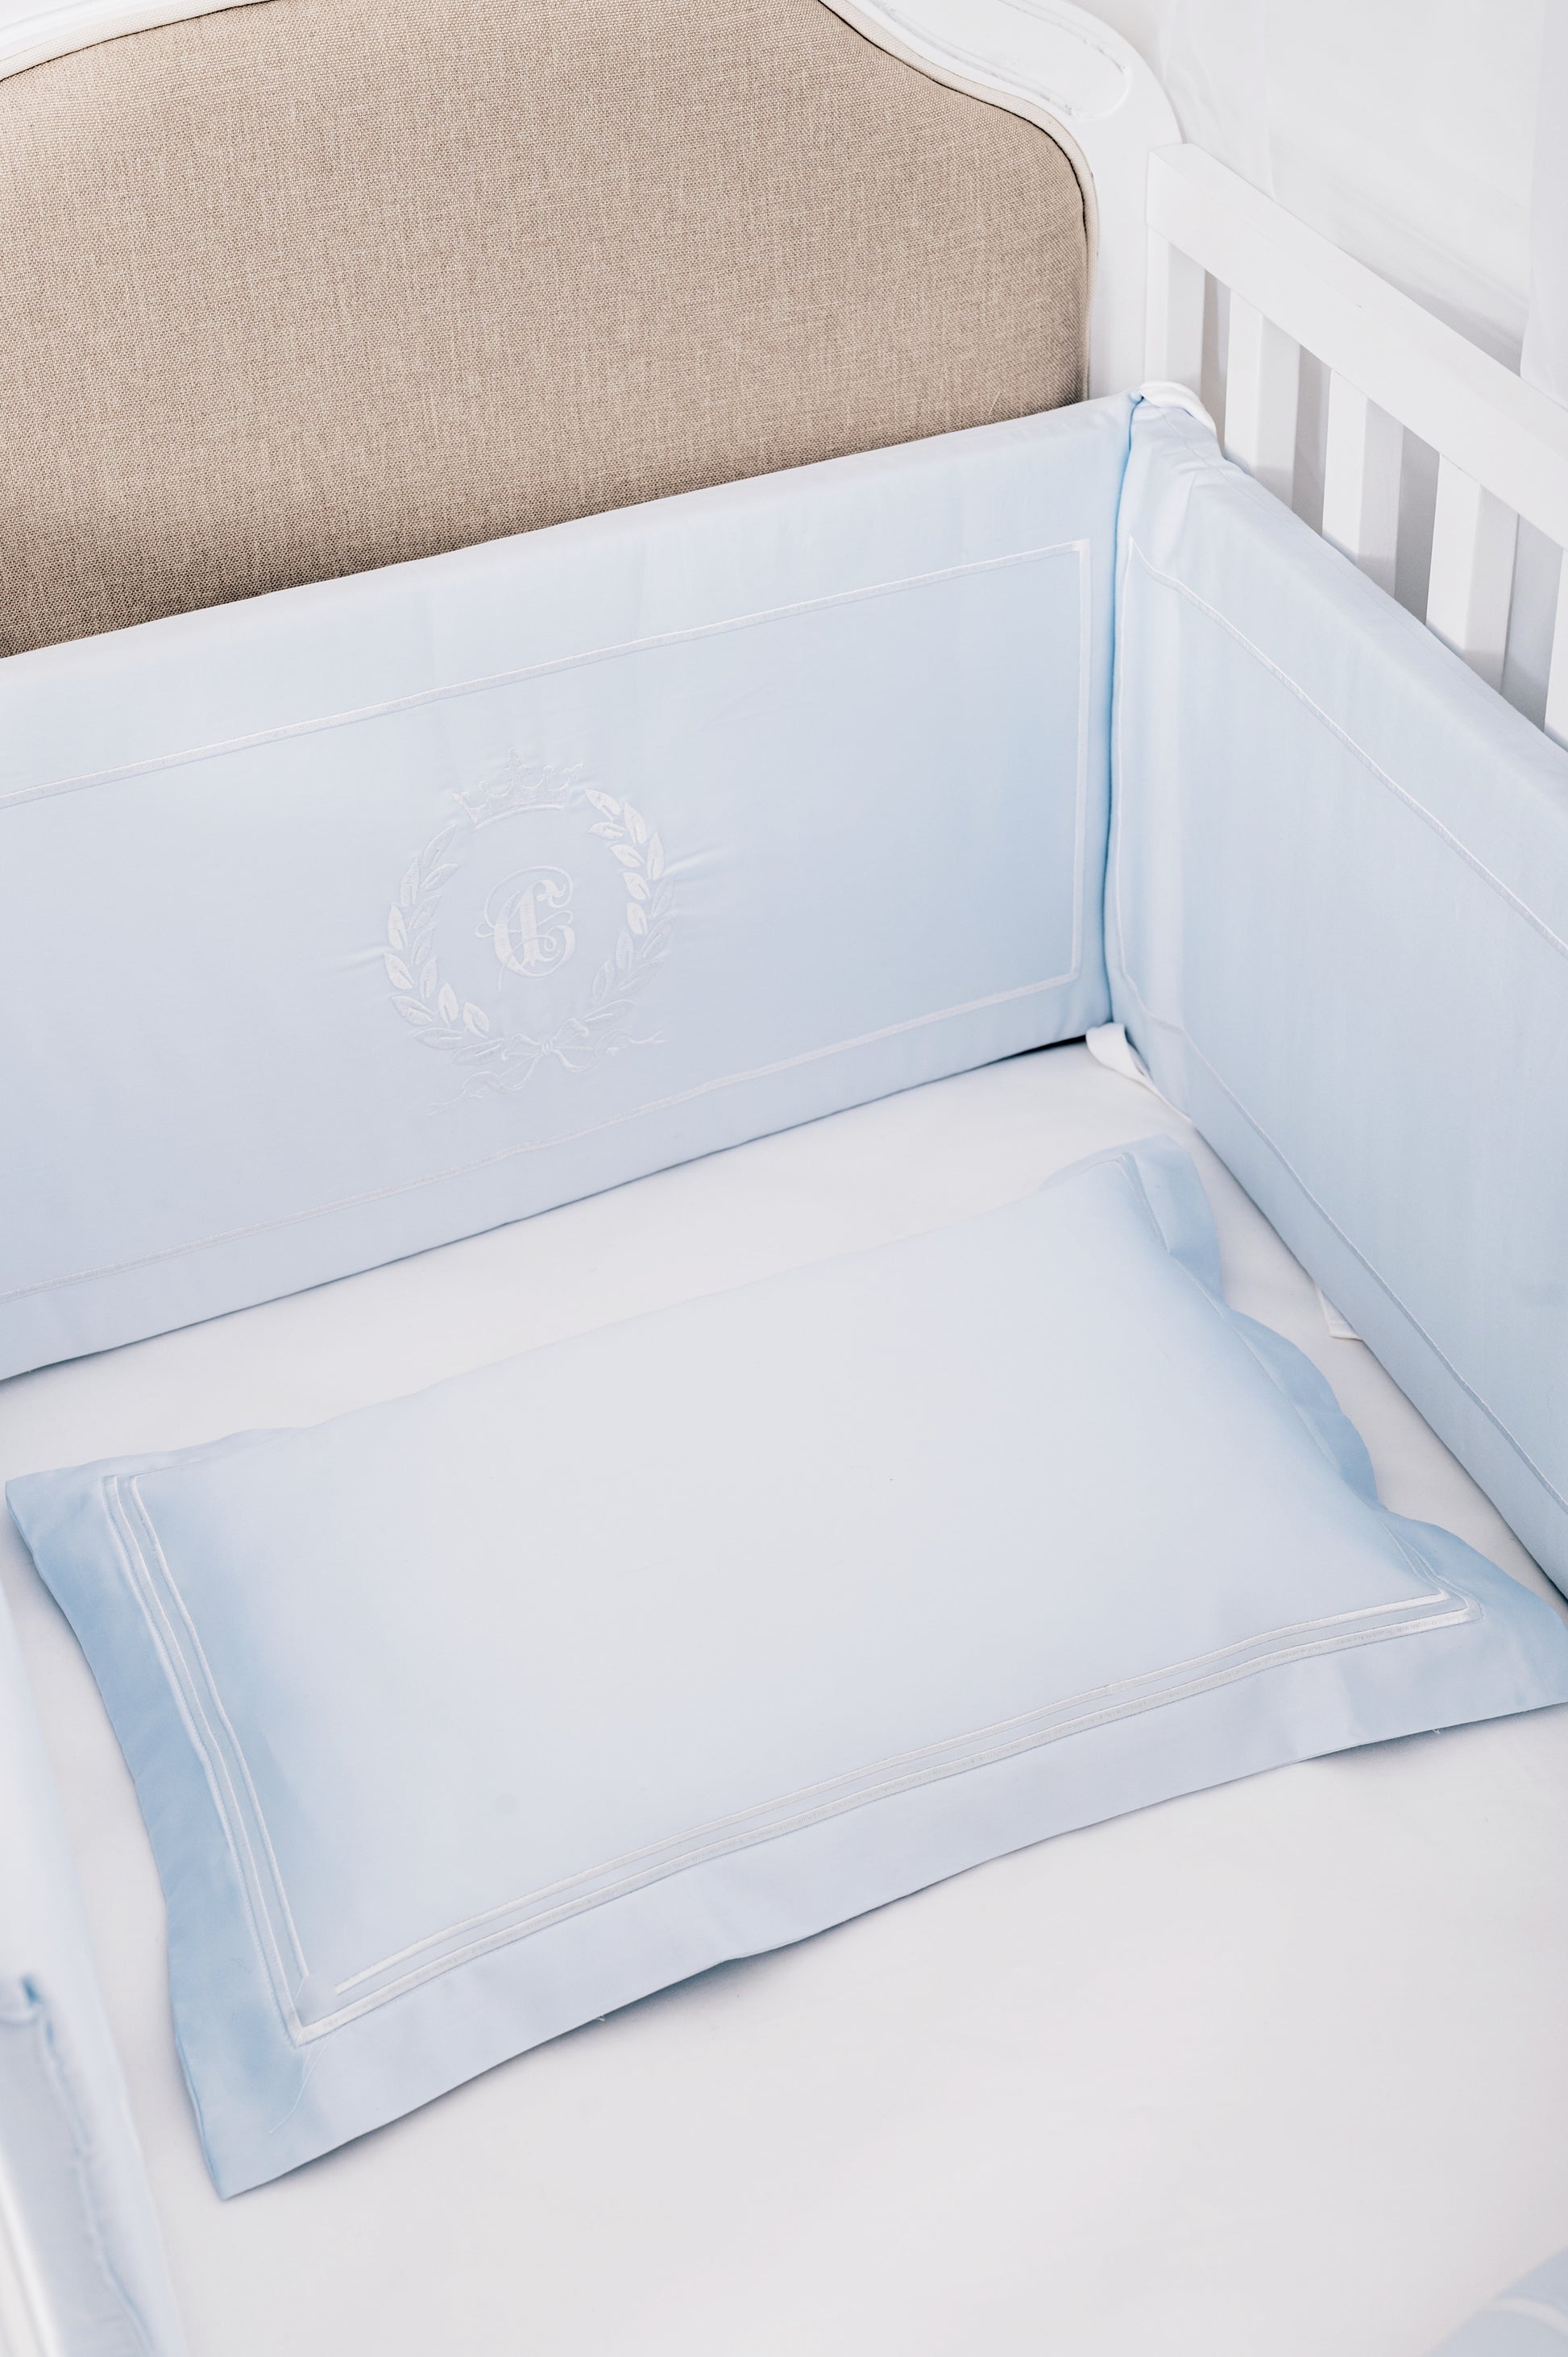 Best Blue Baby pillow and cot beddings for baby boy